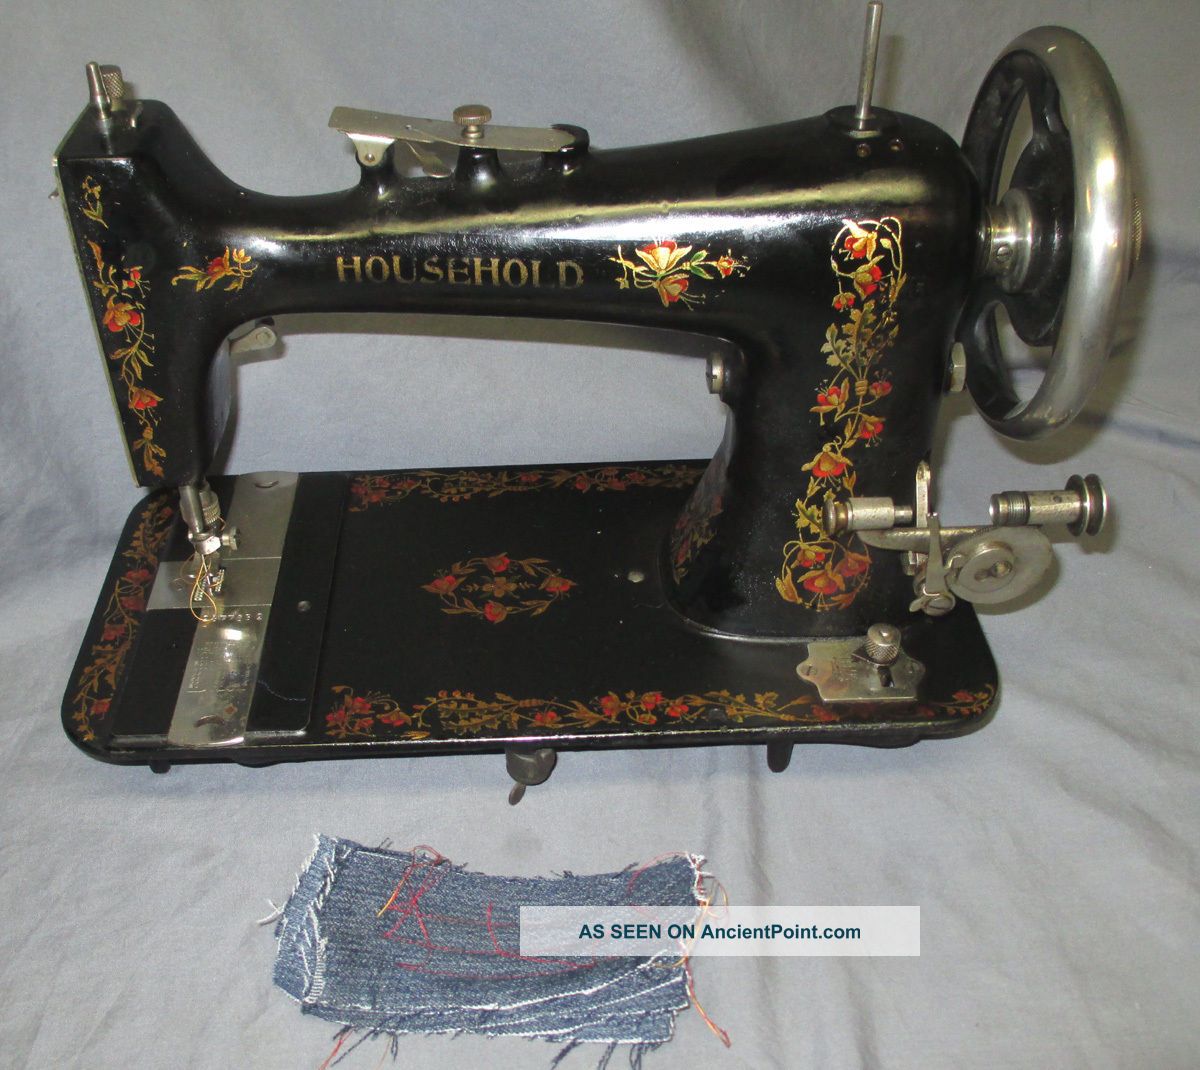 Serviced Antique Floral Household Treadle Sewing Machine Video Minnesota C Sewing Machines photo